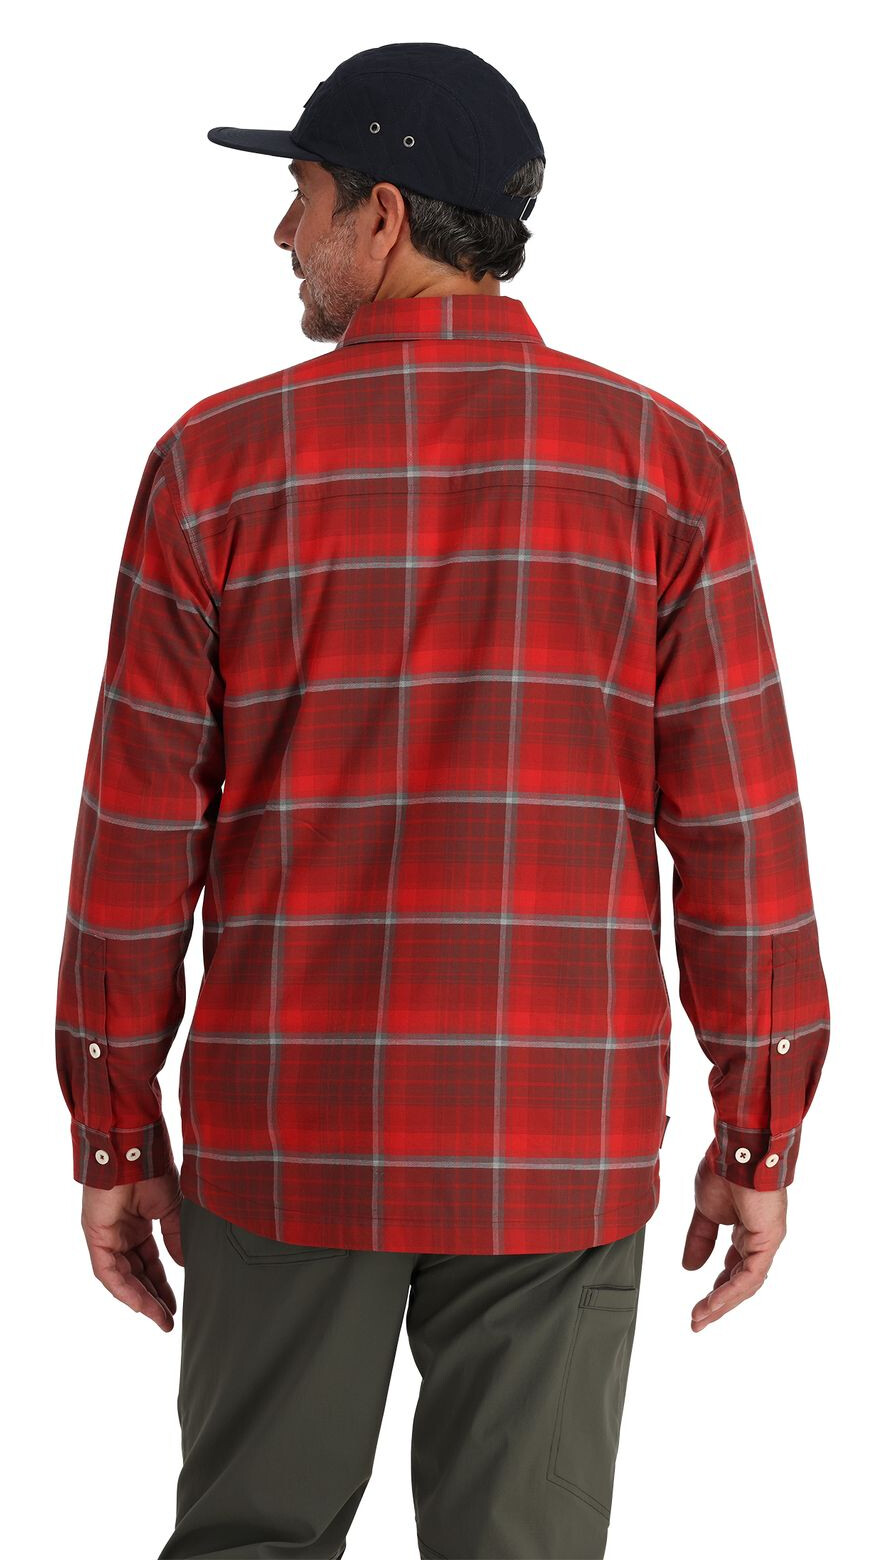 Fishing Shirt Simms Coldweather Cutty Red Asym Ombre Plaid